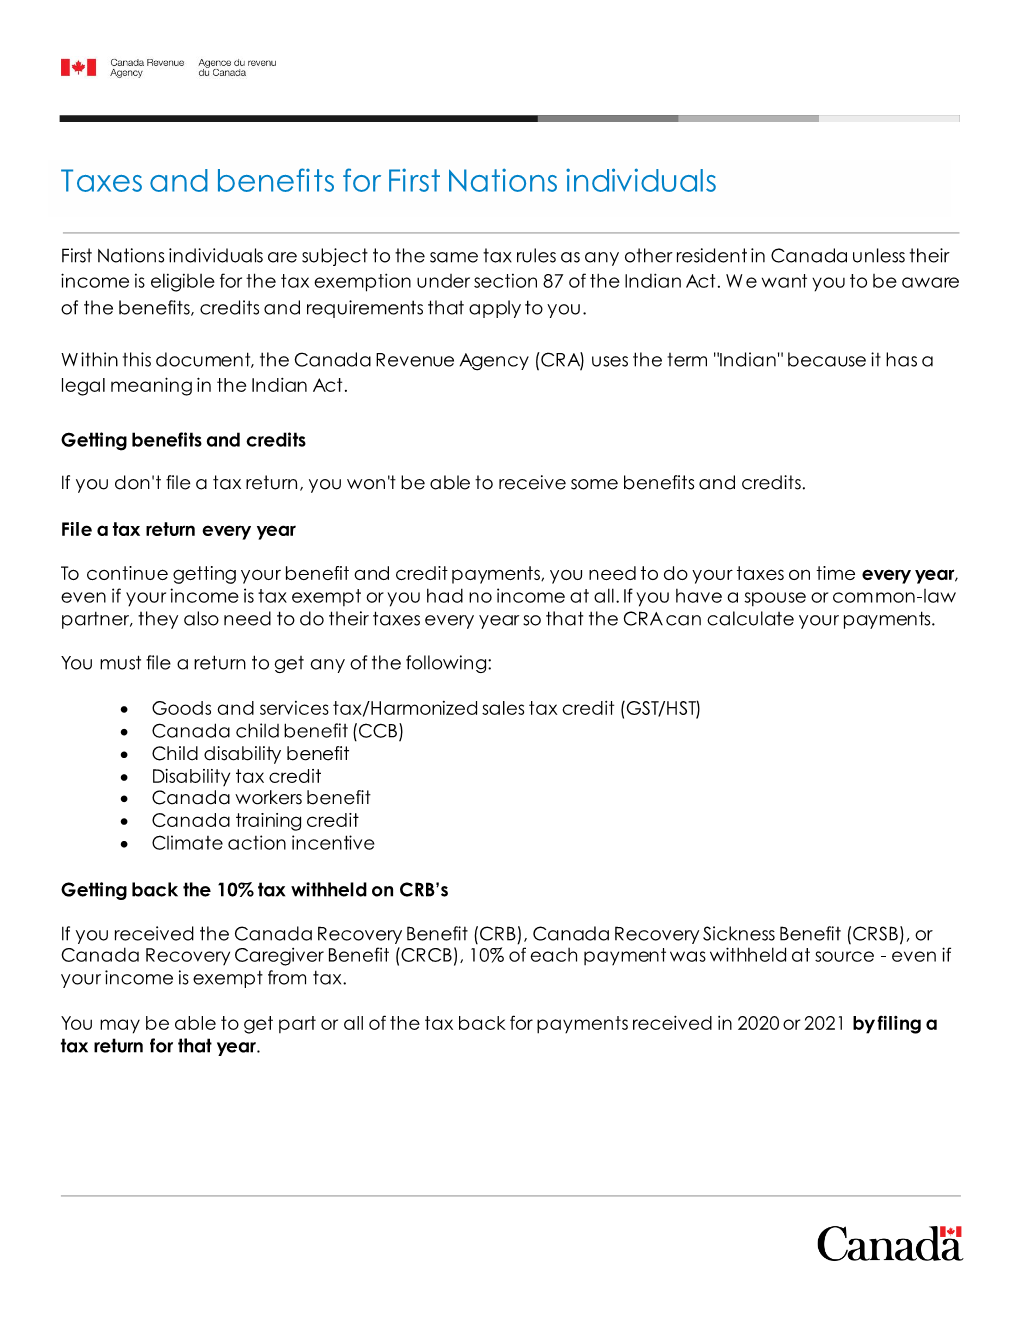 Taxes and Benefits for First Nations Individuals